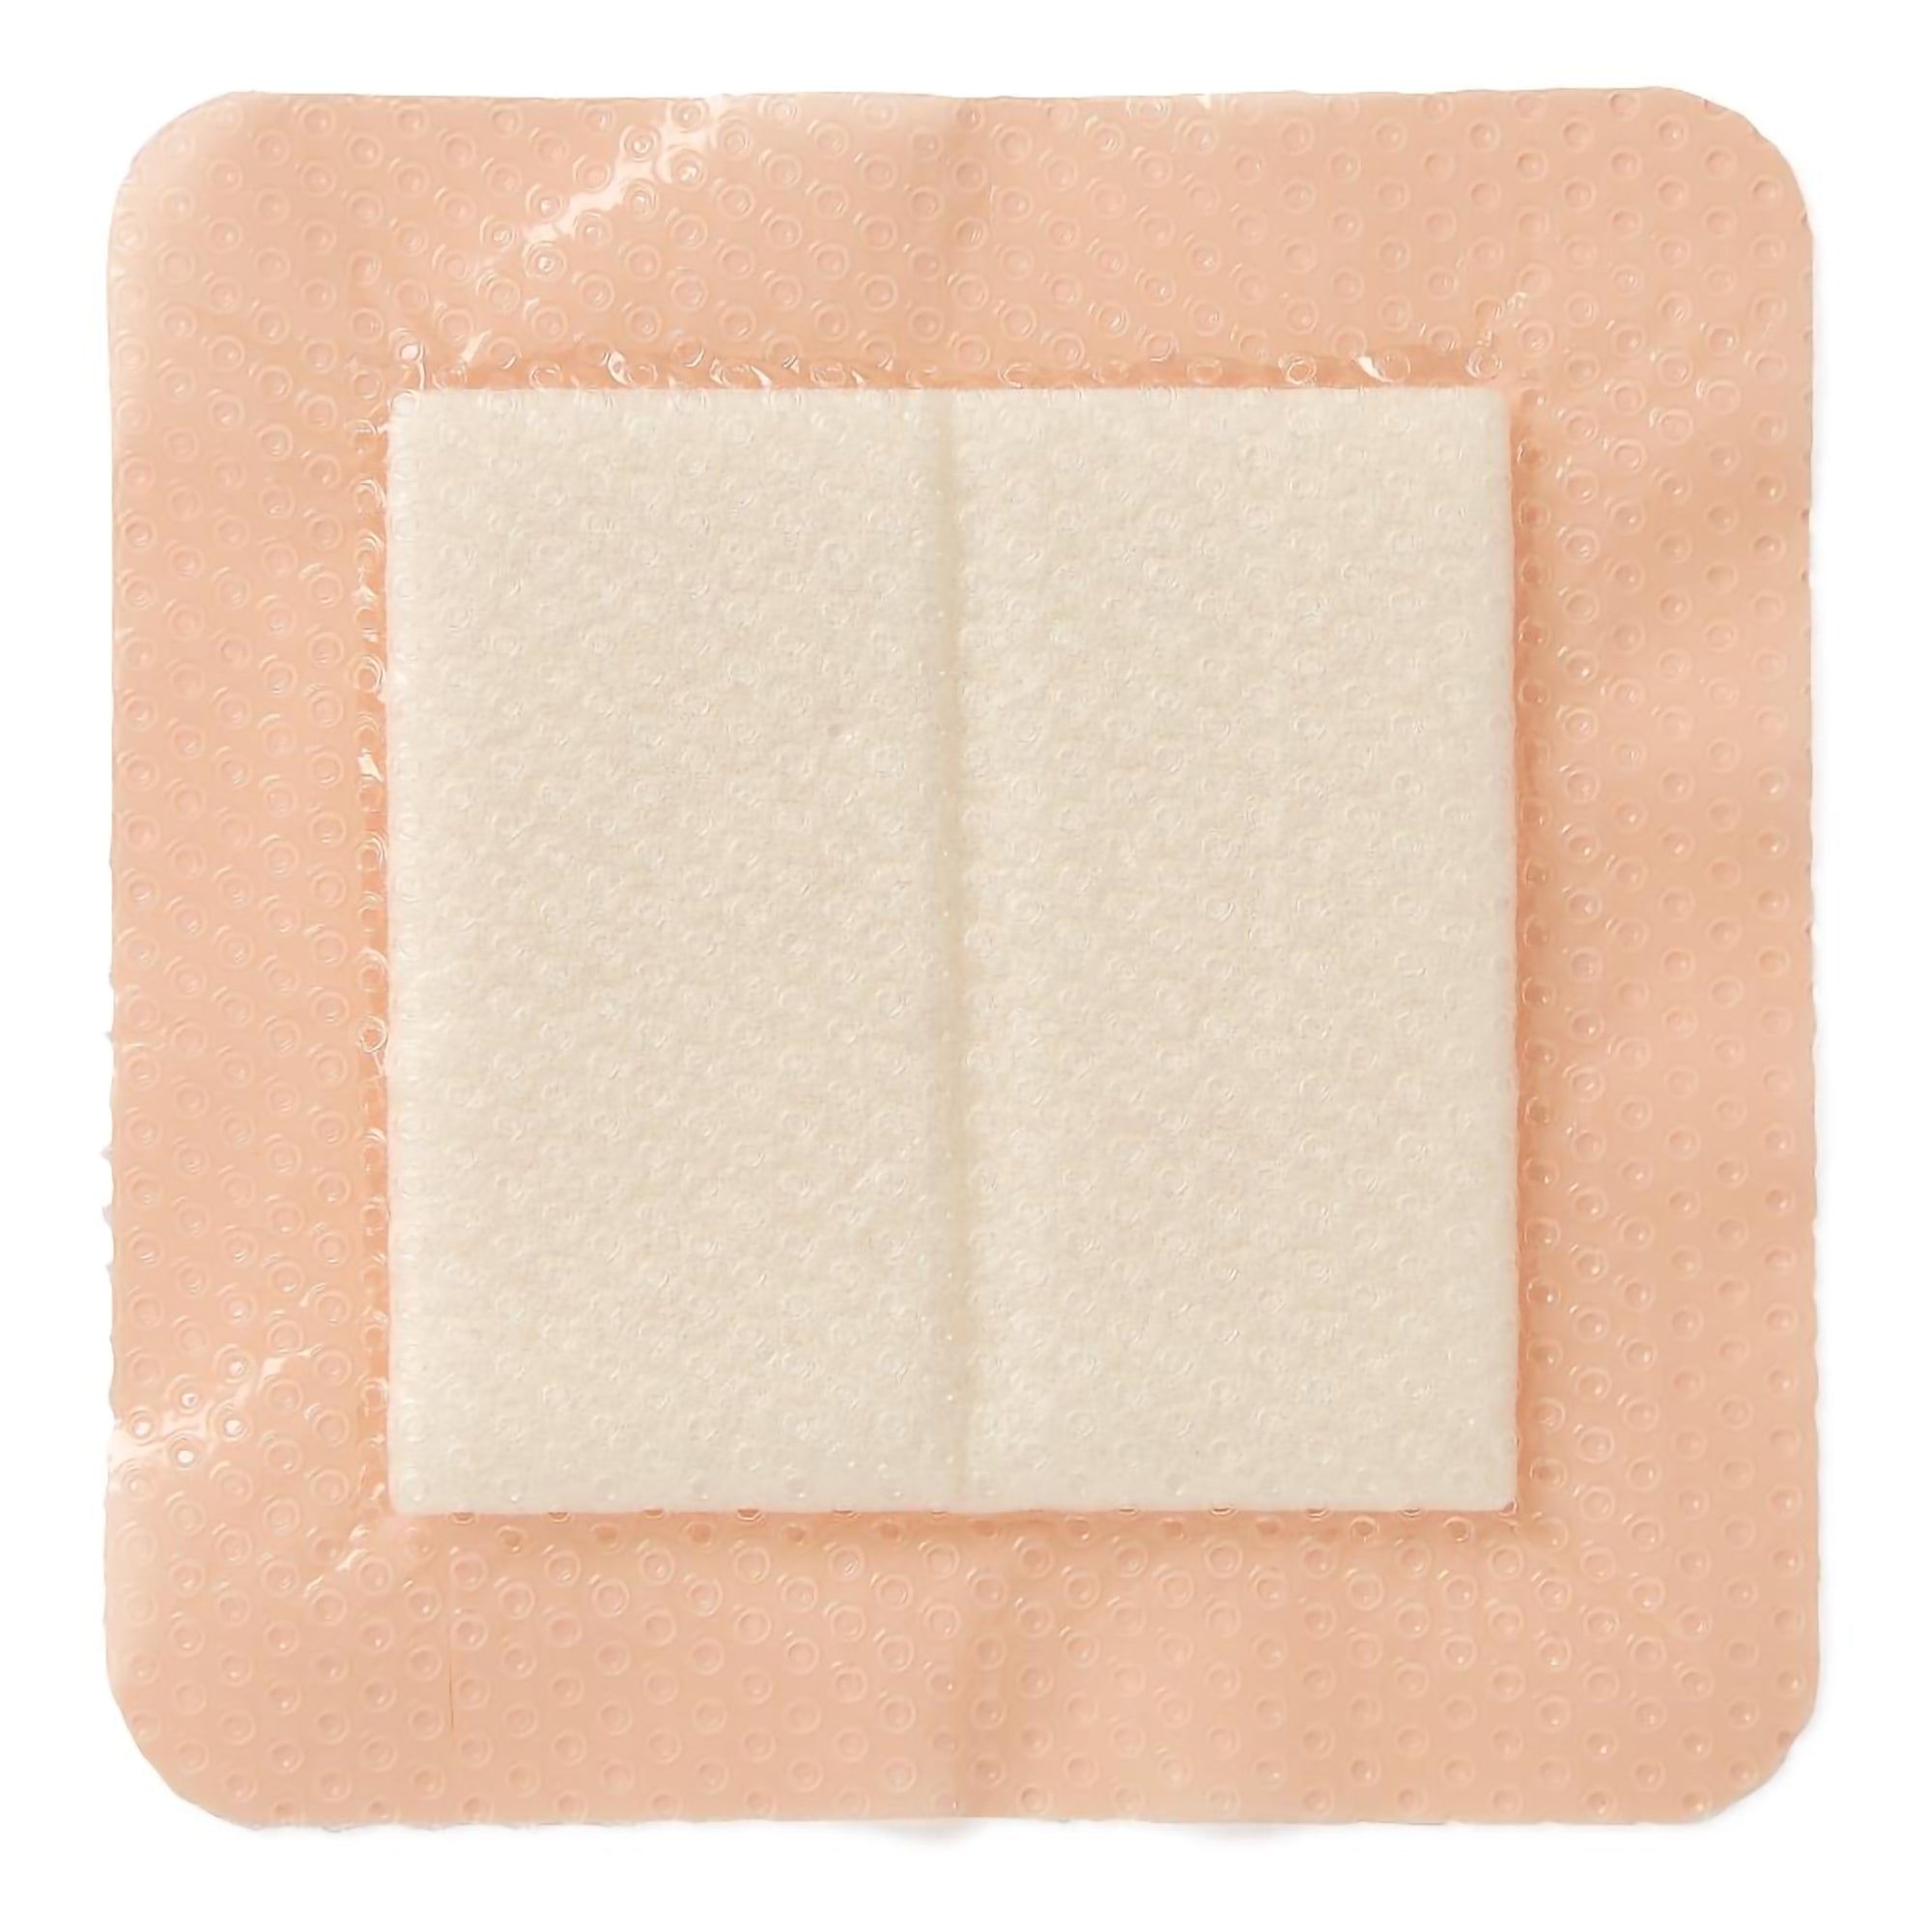 Medline Optifoam® Gentle EX Foam Dressing with Border - 4 x 4 Inch, Silicone Face and Border, Sterile